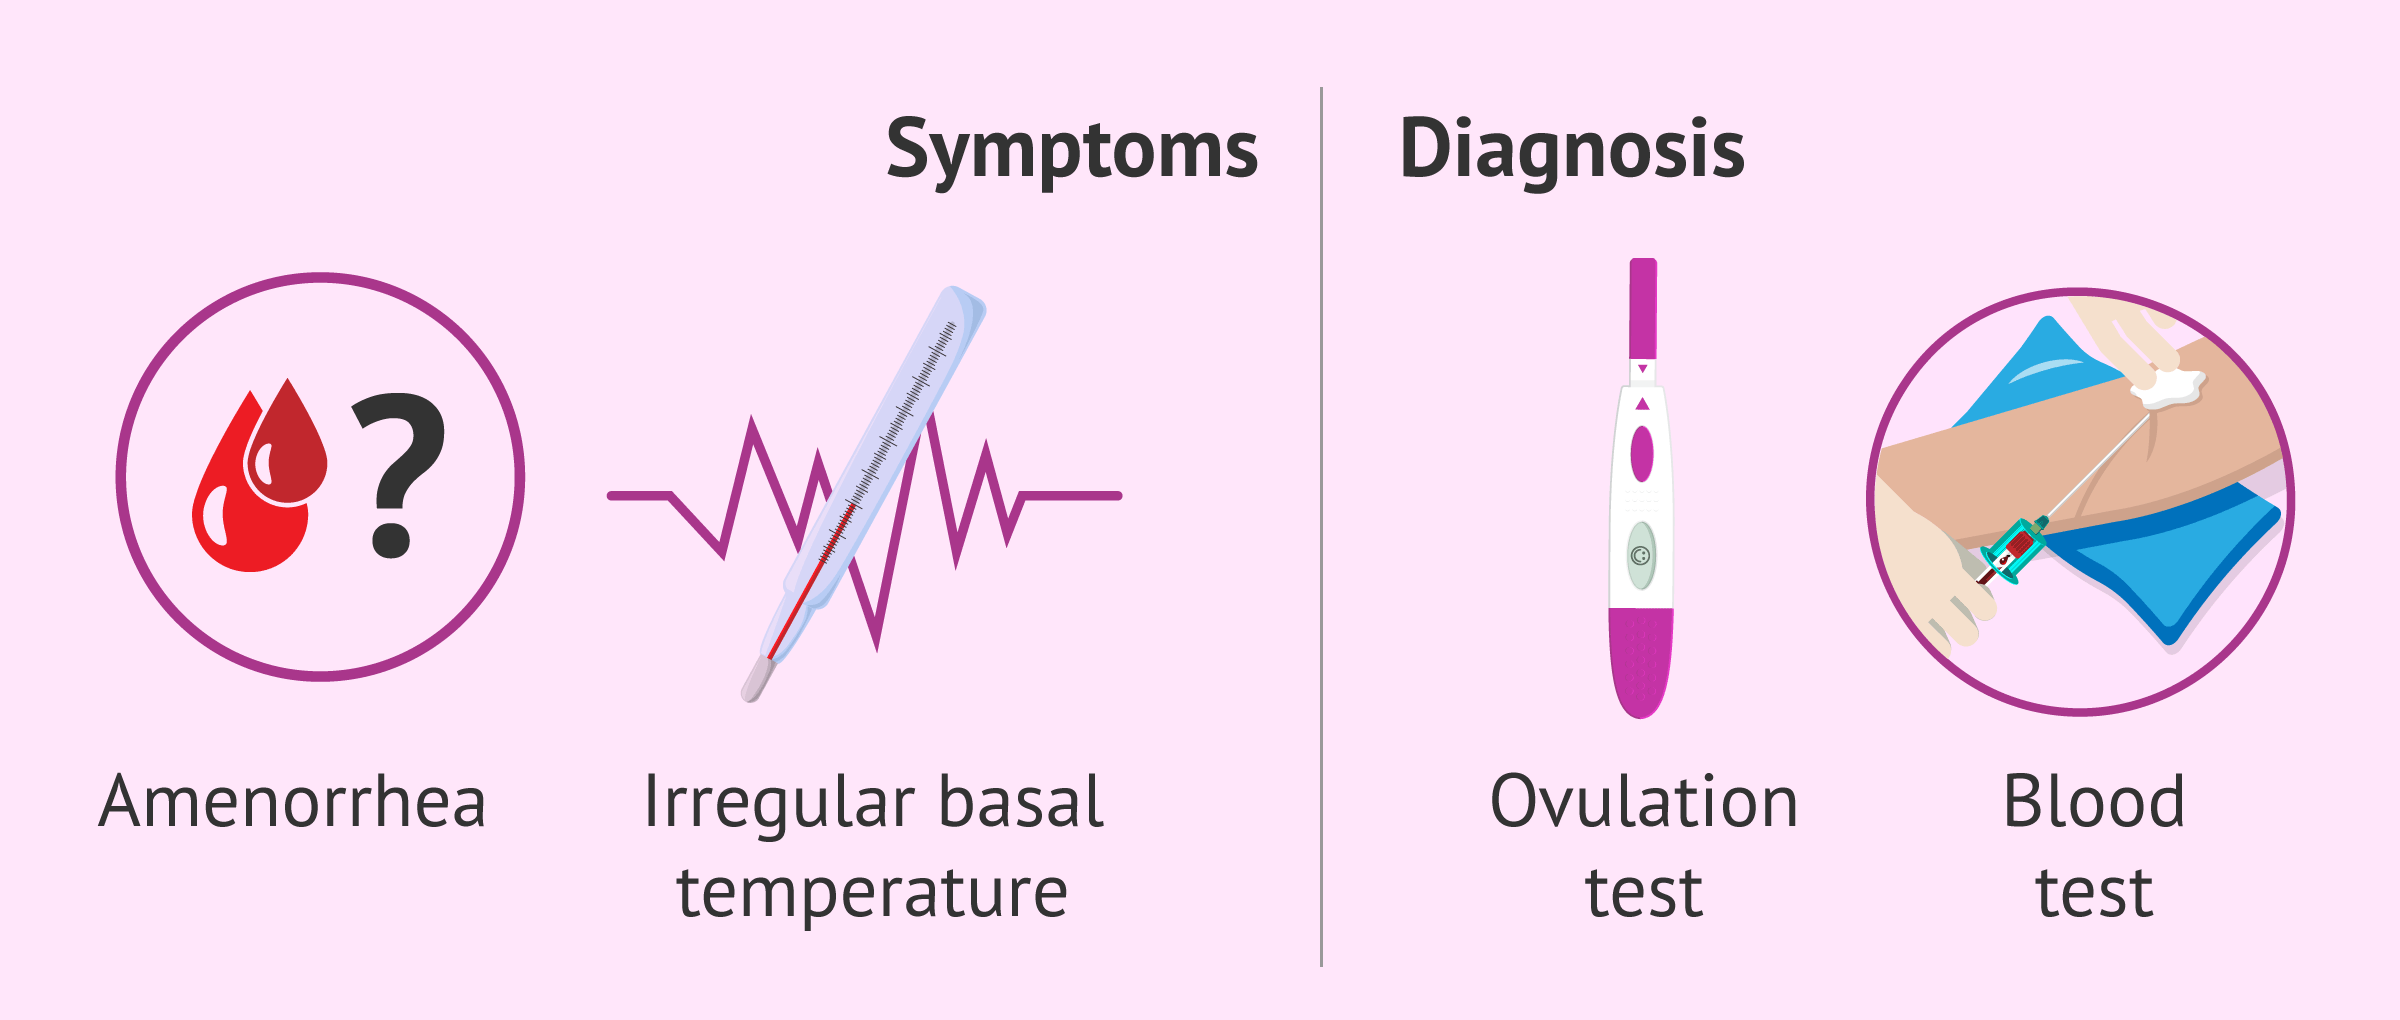 Symptoms and diagnosis of anovulation